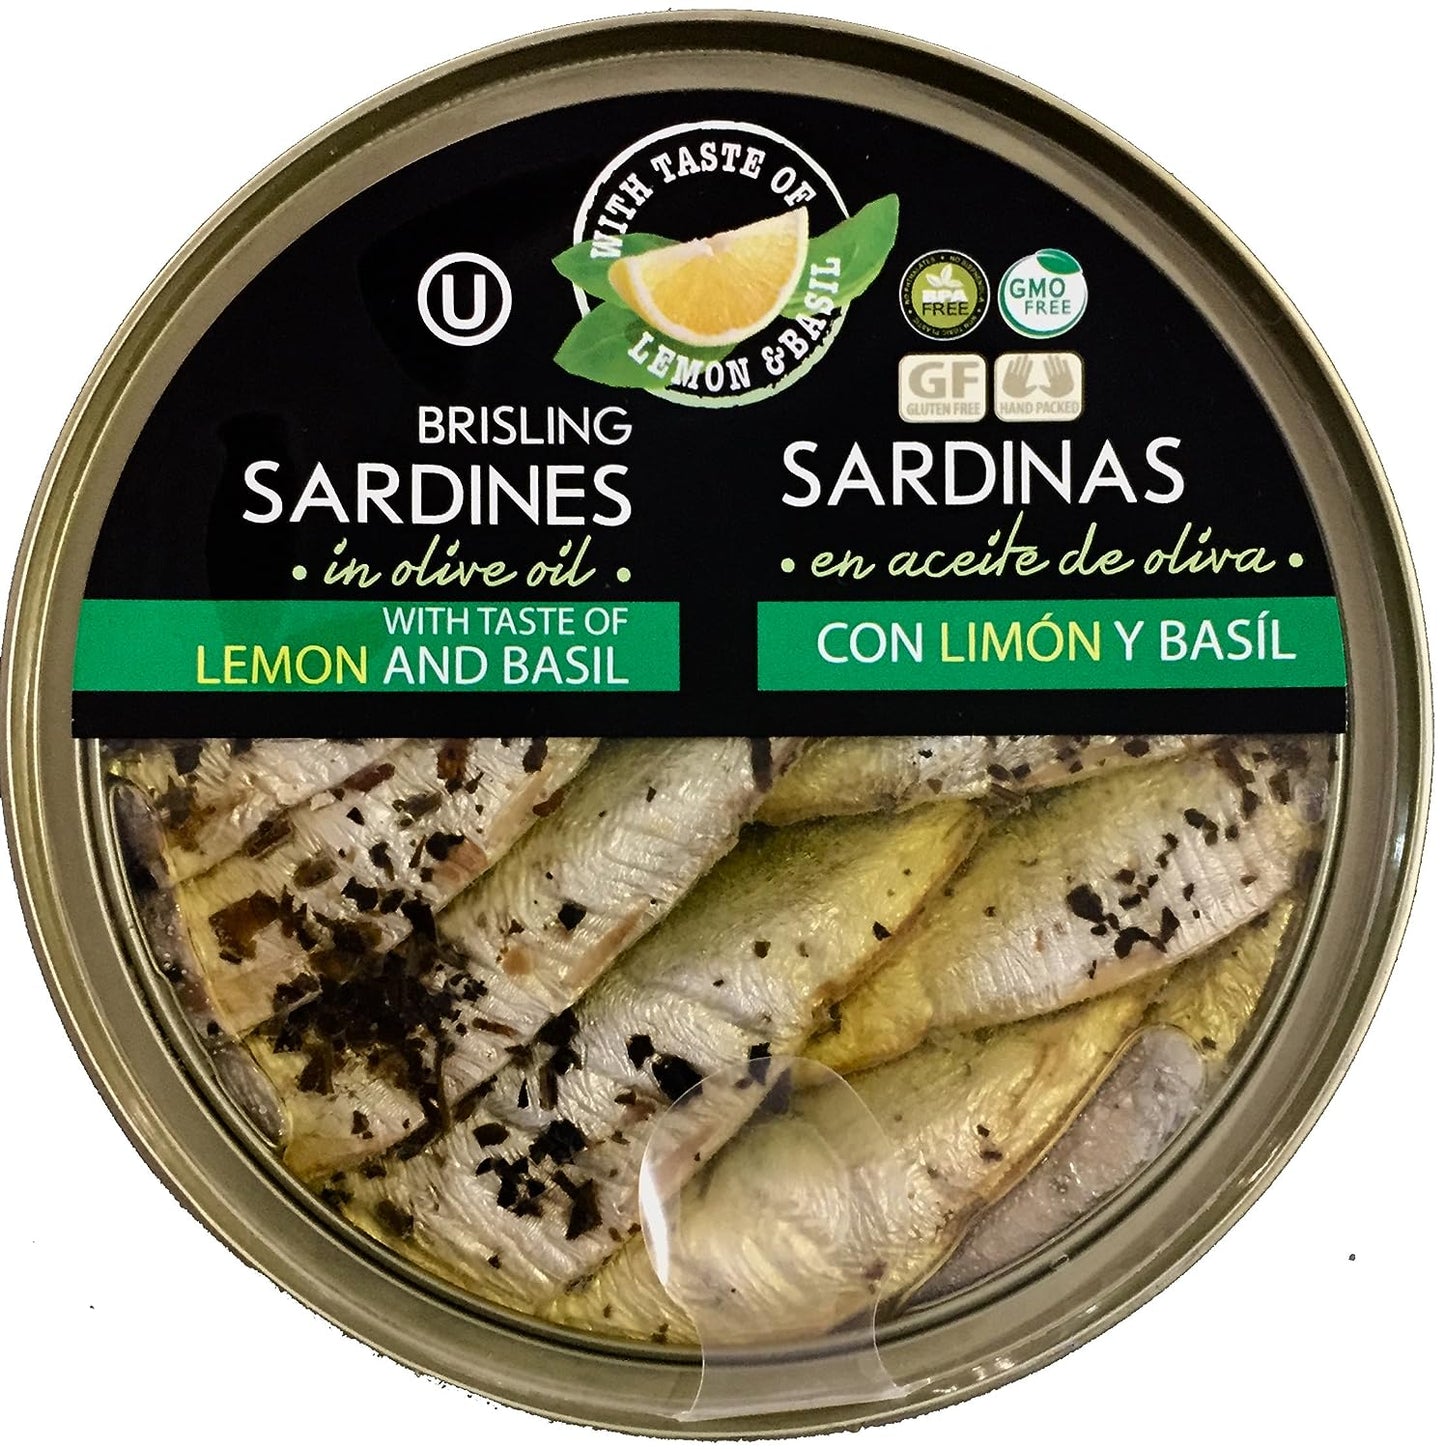 Grilled Catch Wild Caught Brisling Sardines in Olive Oil with Lemon & Basil 5.6-Ounce Can